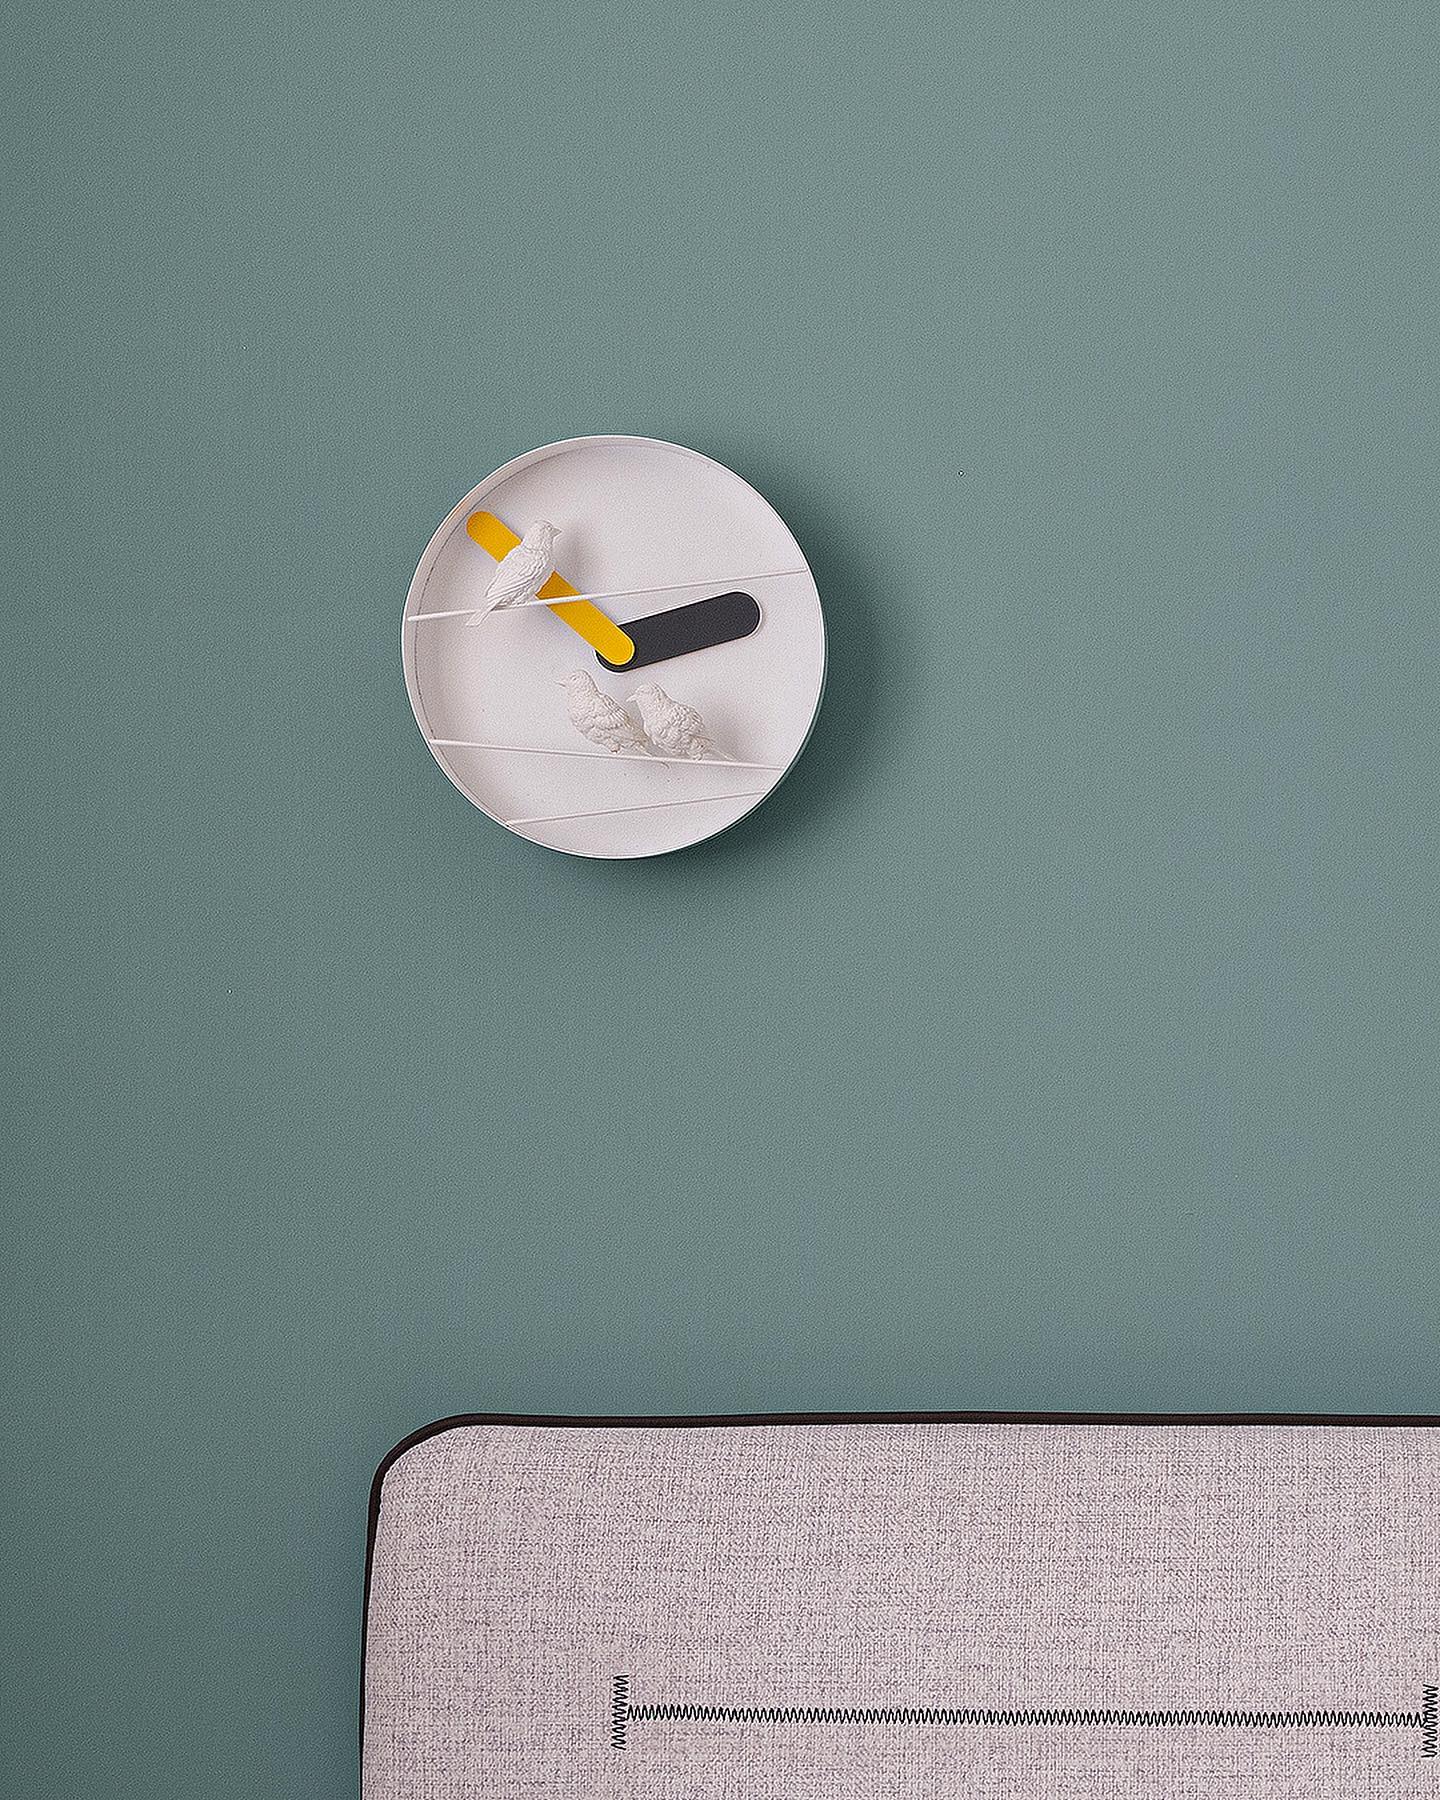 Sparrow round wall clock, feel immerse yourself in nature!